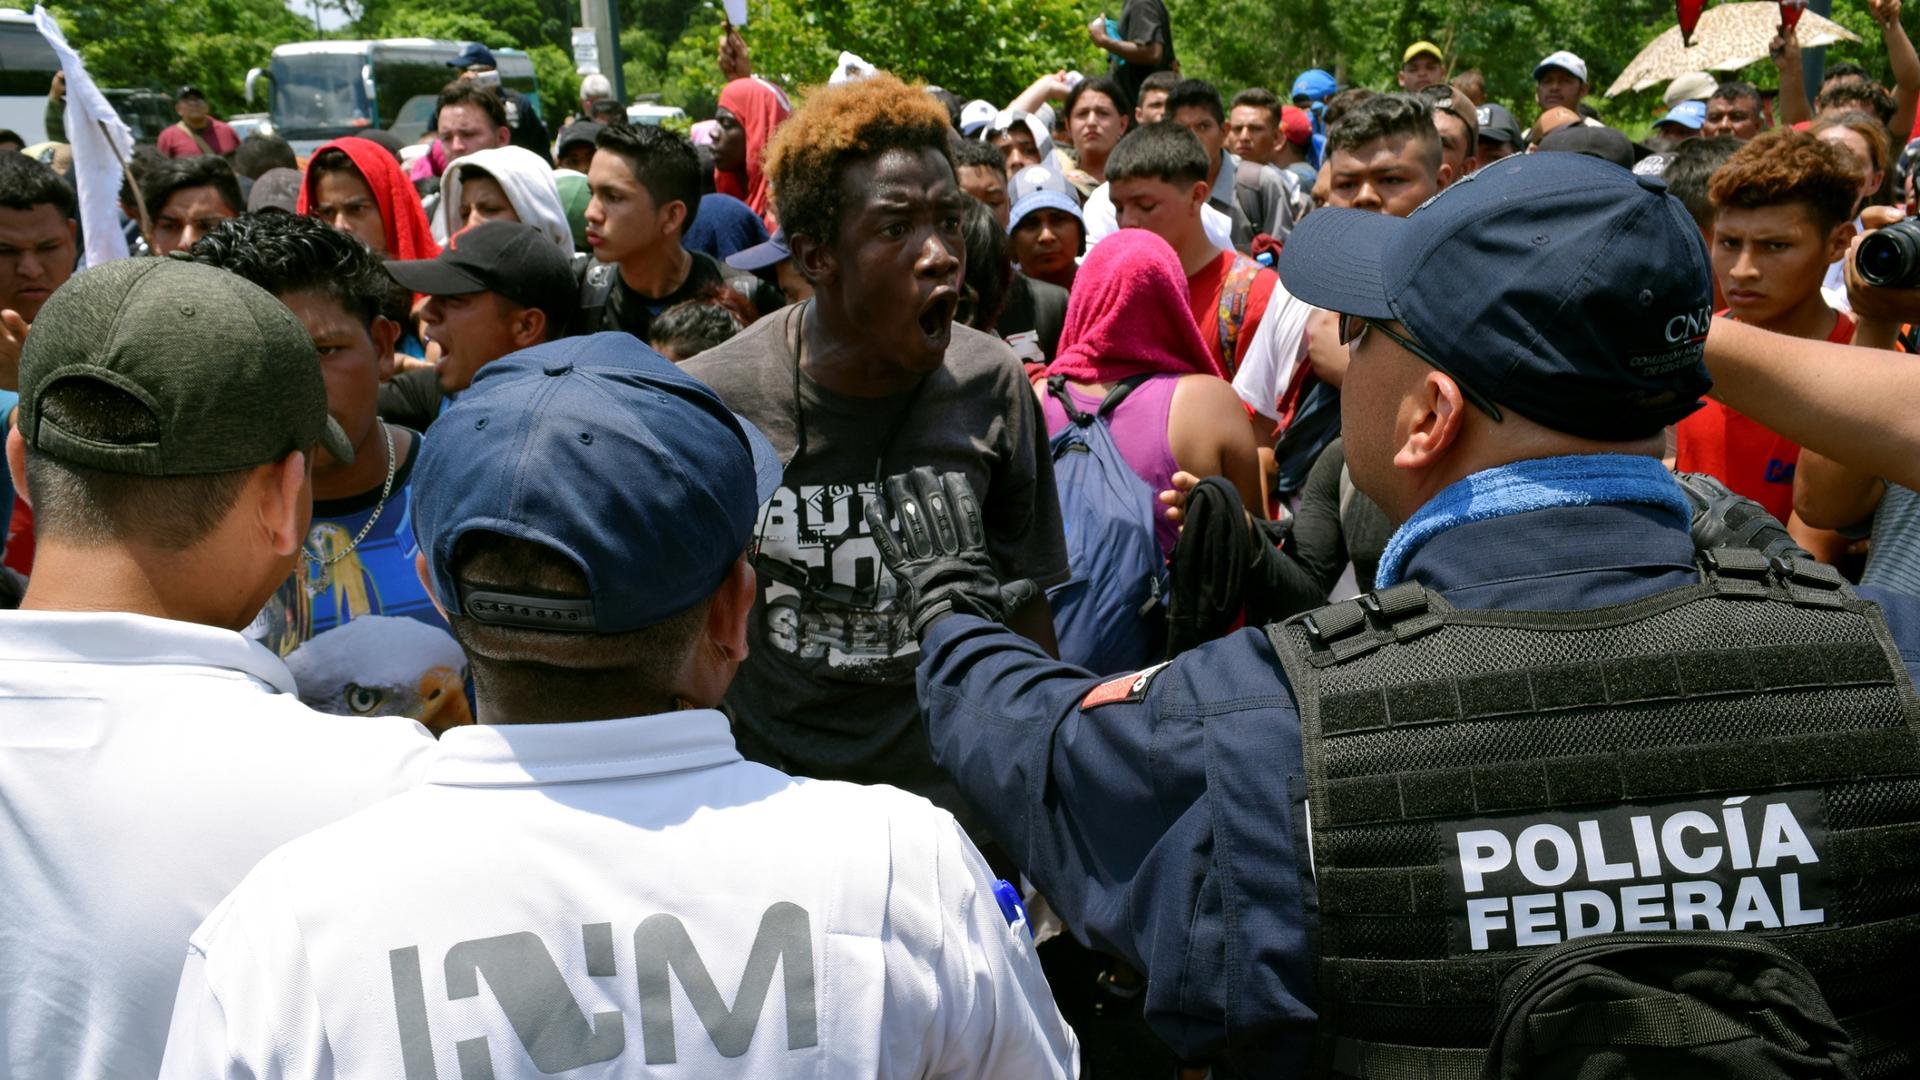 A man confronts a police officer in a dense crowd